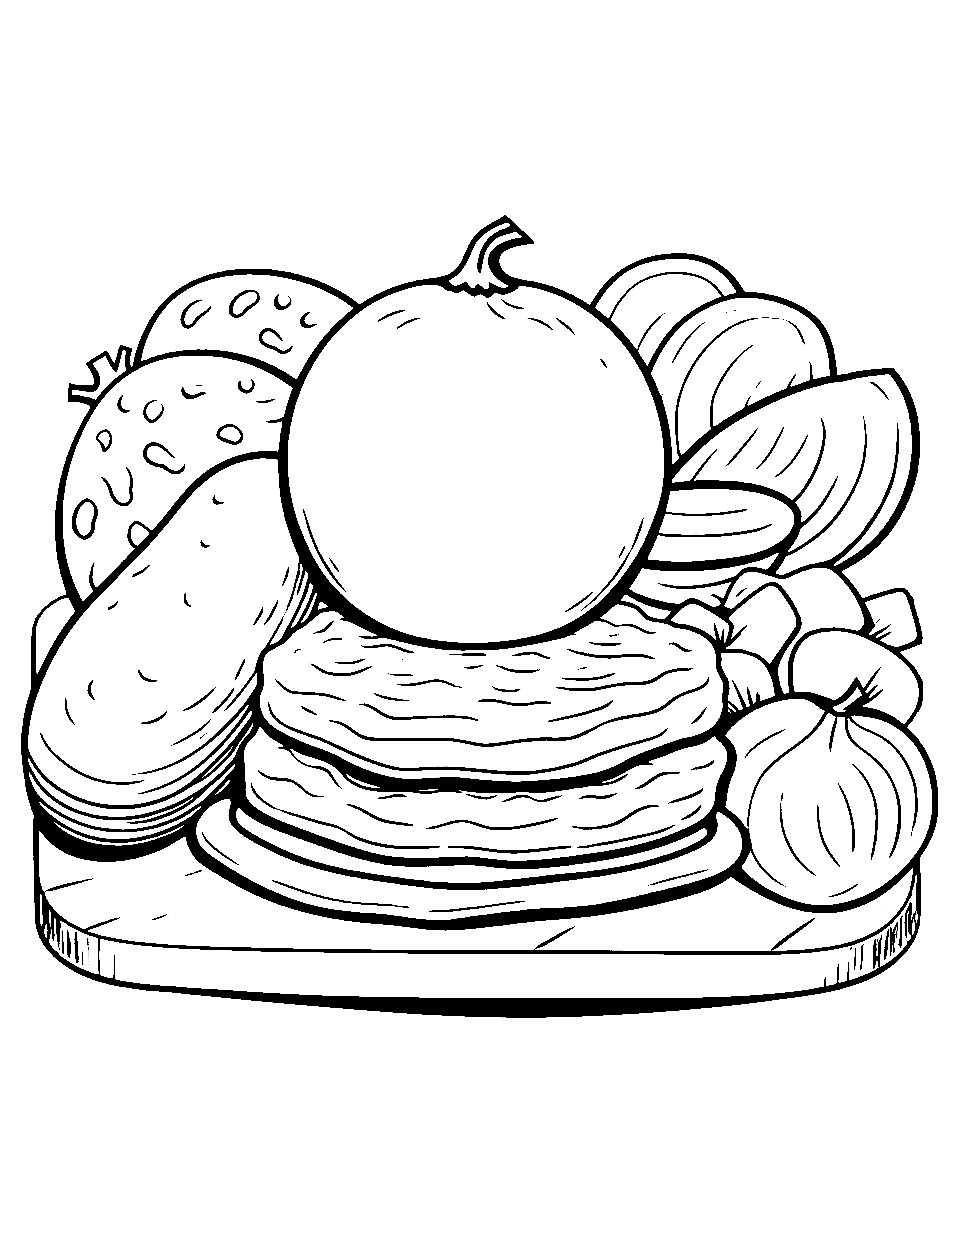 Cutting board showcase Food Coloring Page - Various fruits and veggies on a cutting board.